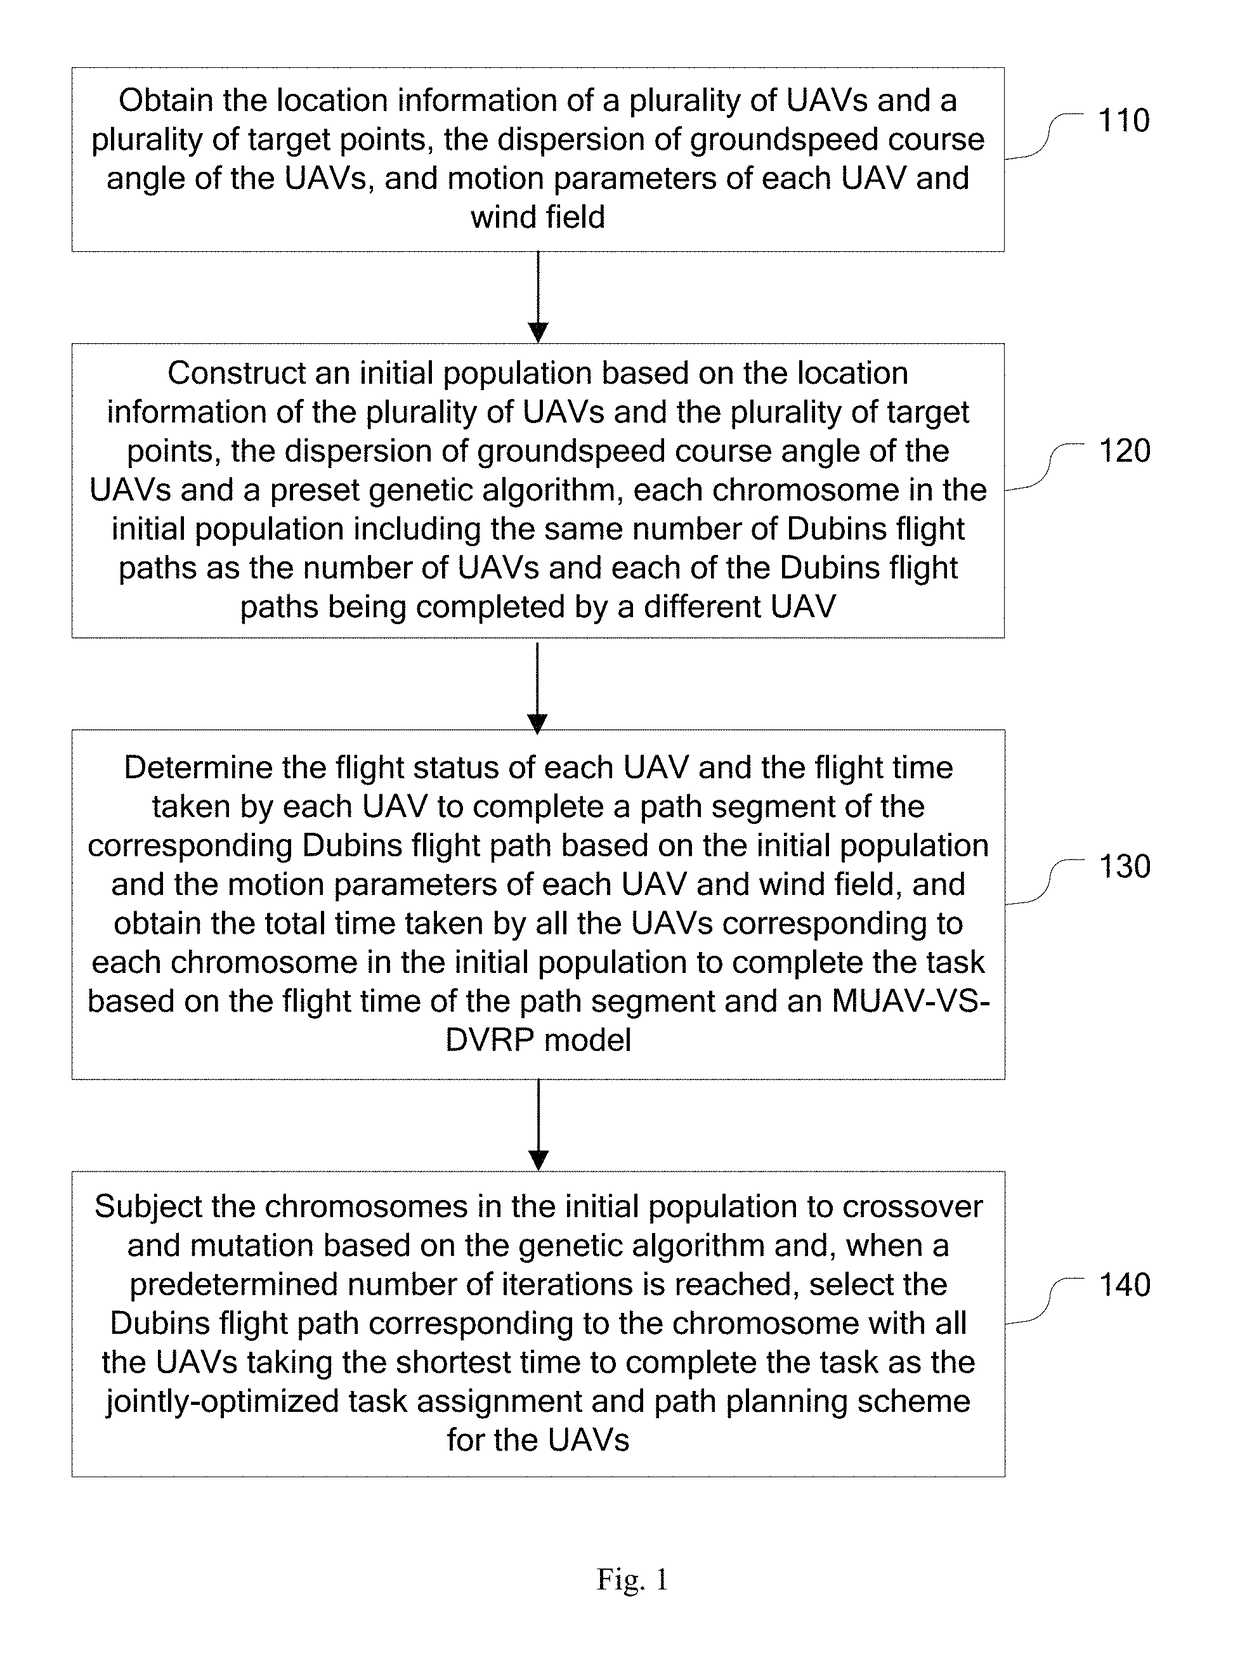 Method and apparatus for joint optimization of multi-UAV task assignment and path planning